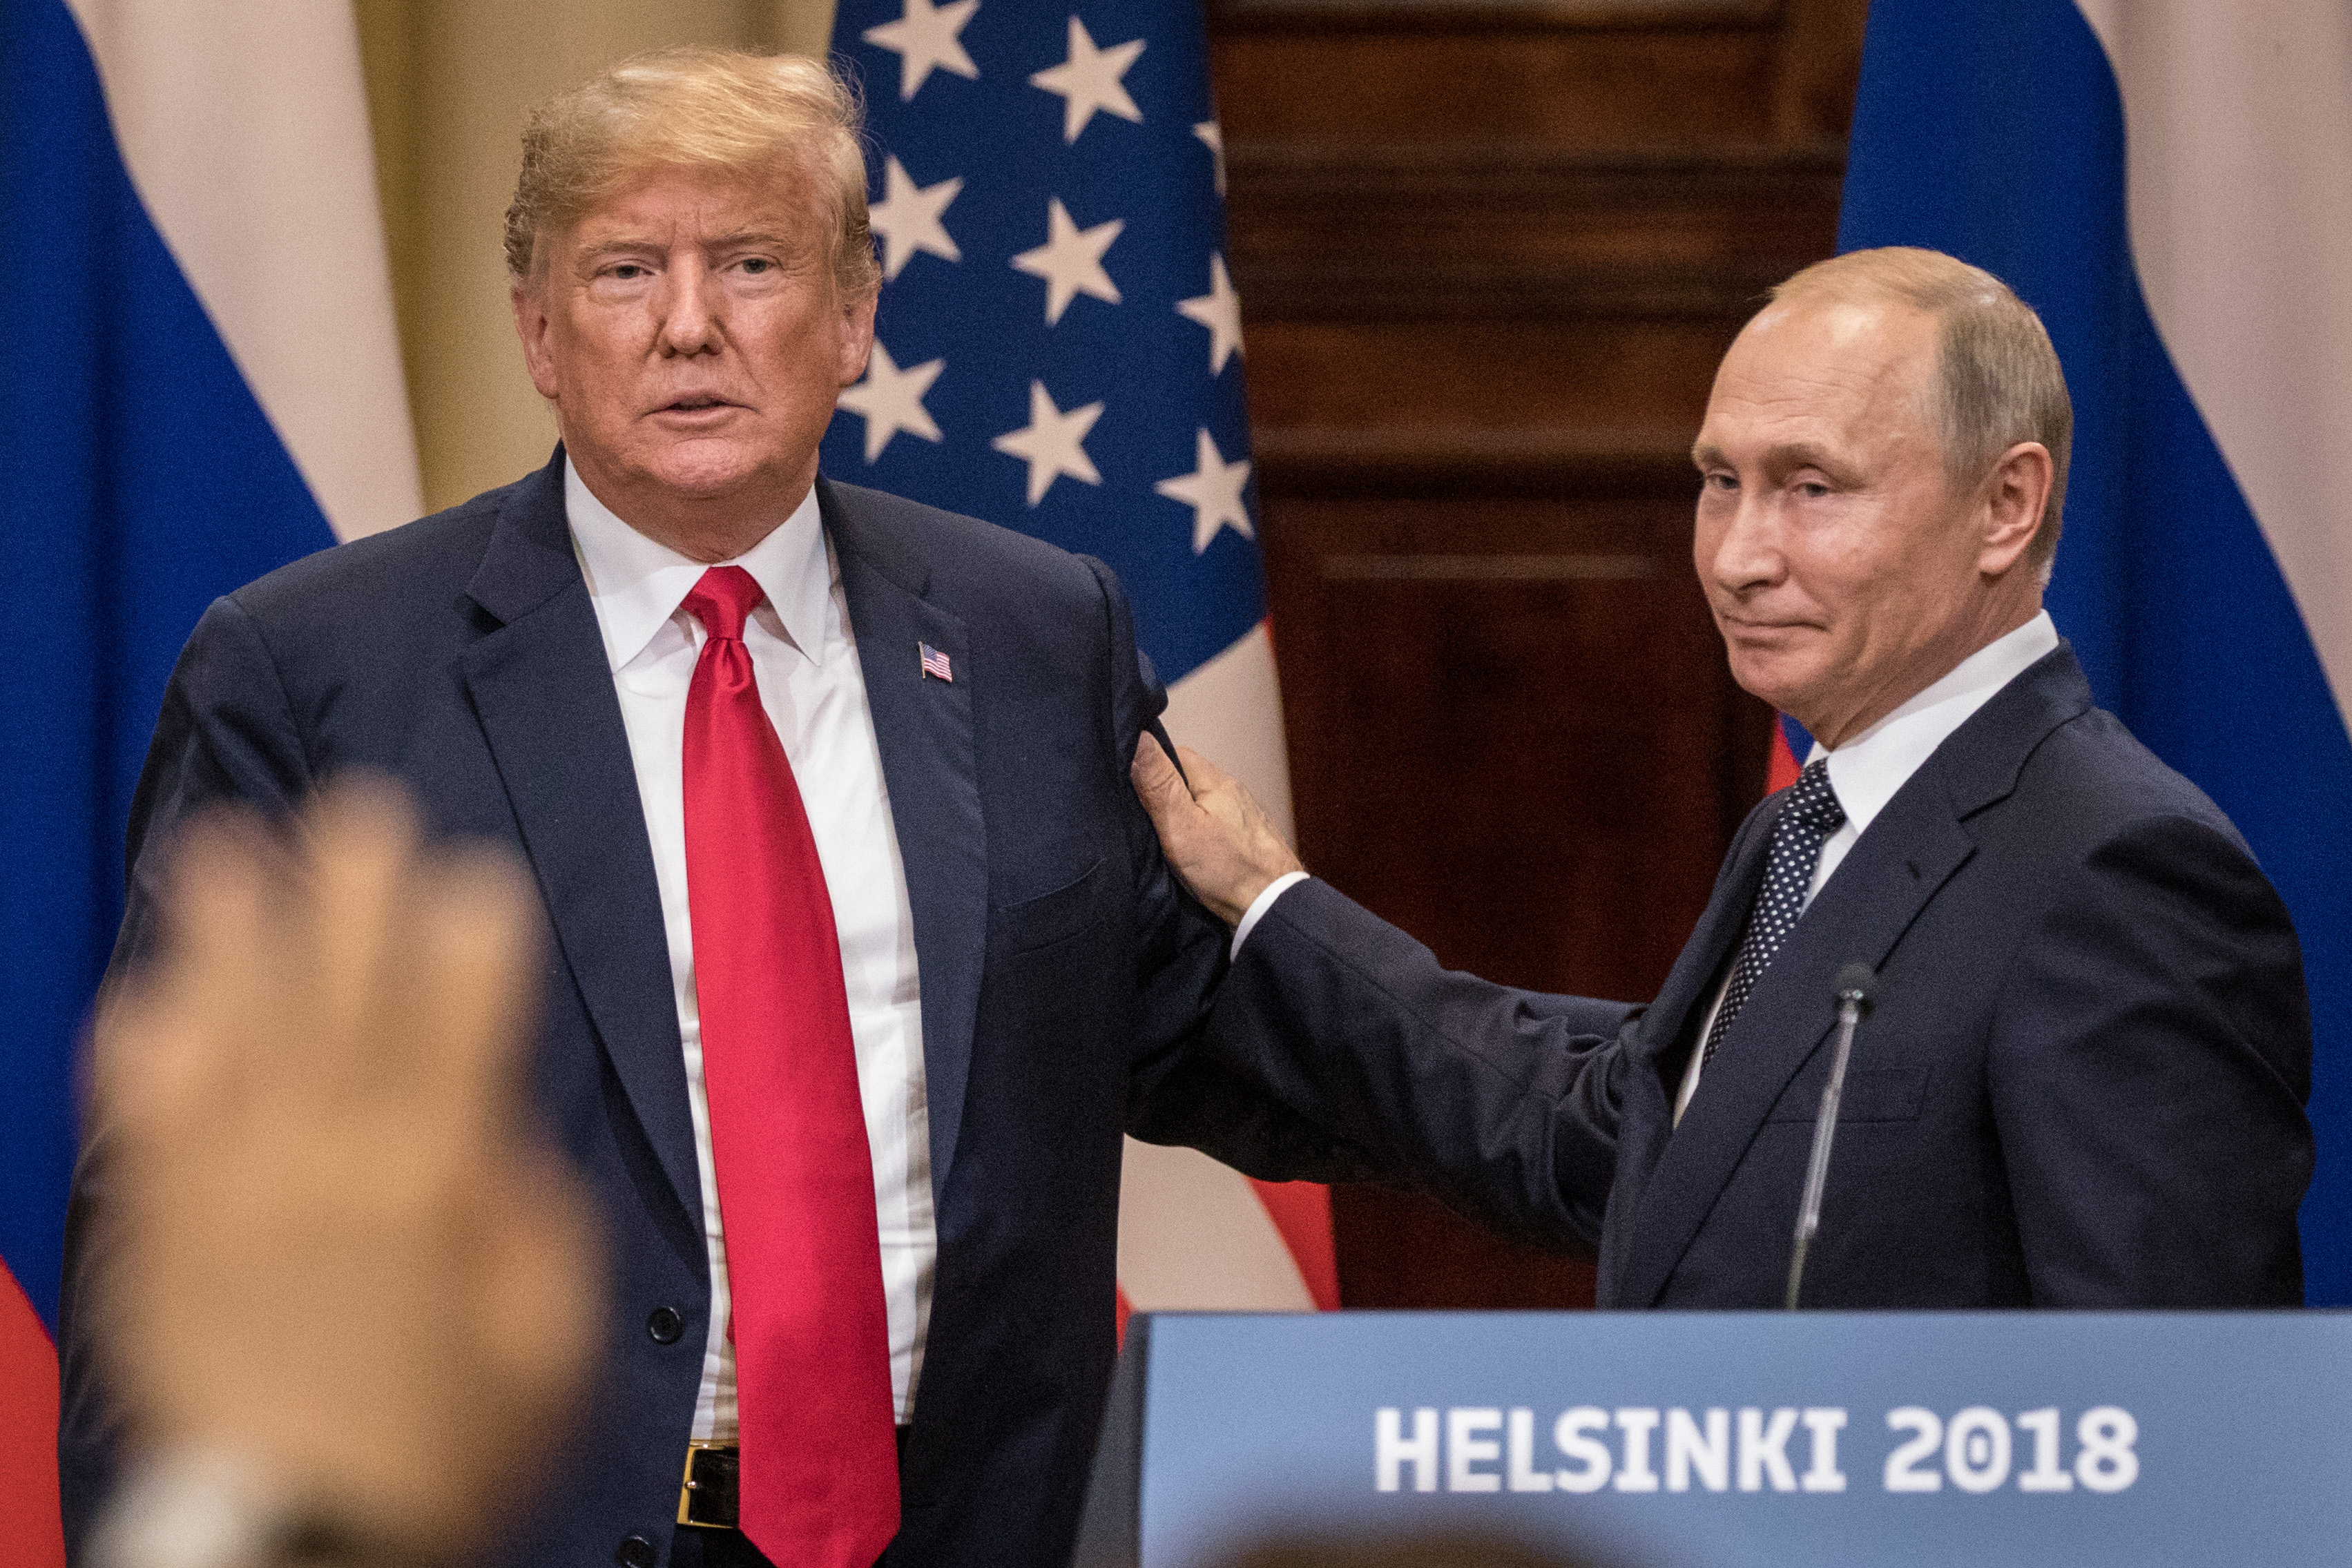 U.S. President Donald Trump (L) and Russian President Vladimir Putin shake hands during a joint press conference after their summit on July 16, 2018 in Helsinki, Finland. The two leaders met one-on-one and discussed a range of issues including the 2016 U.S Election collusion. (Chris McGrath - Getty Images)